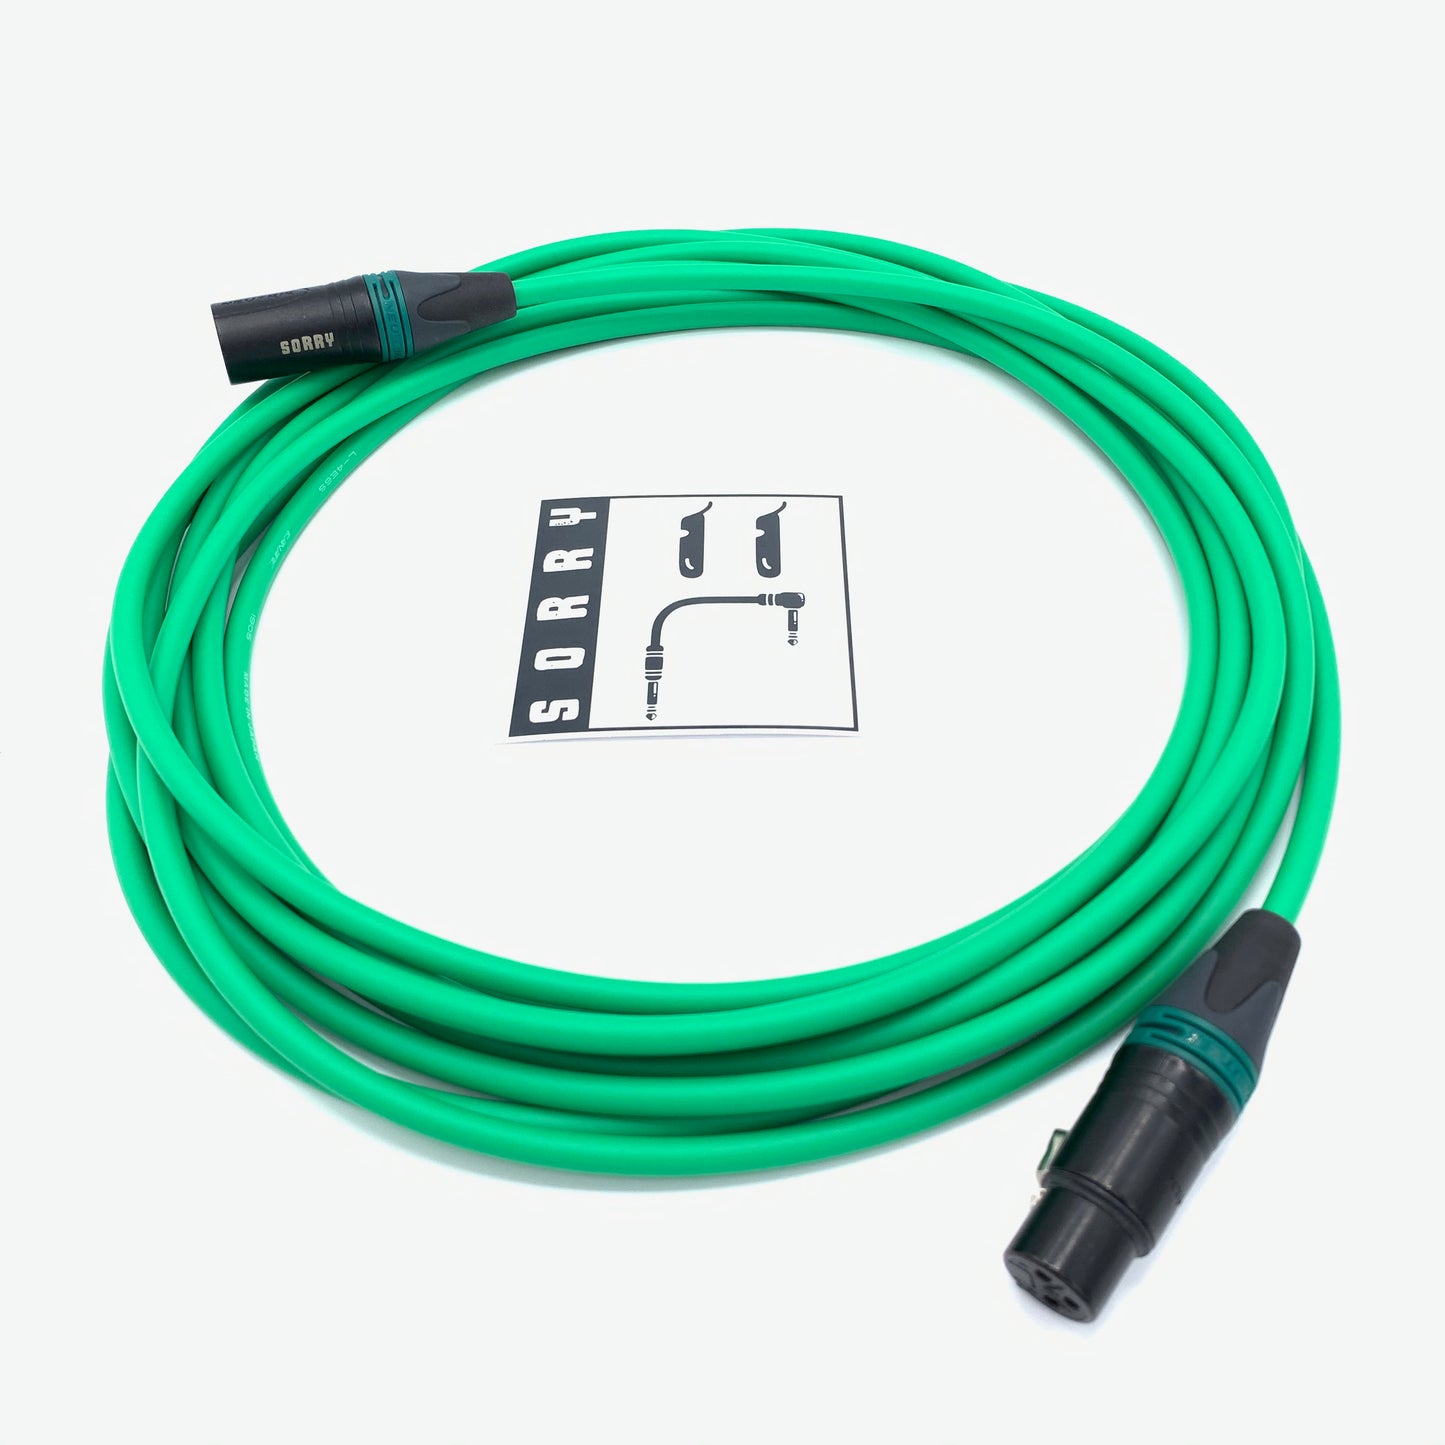 SORRY Microphone Cable - Standard Green